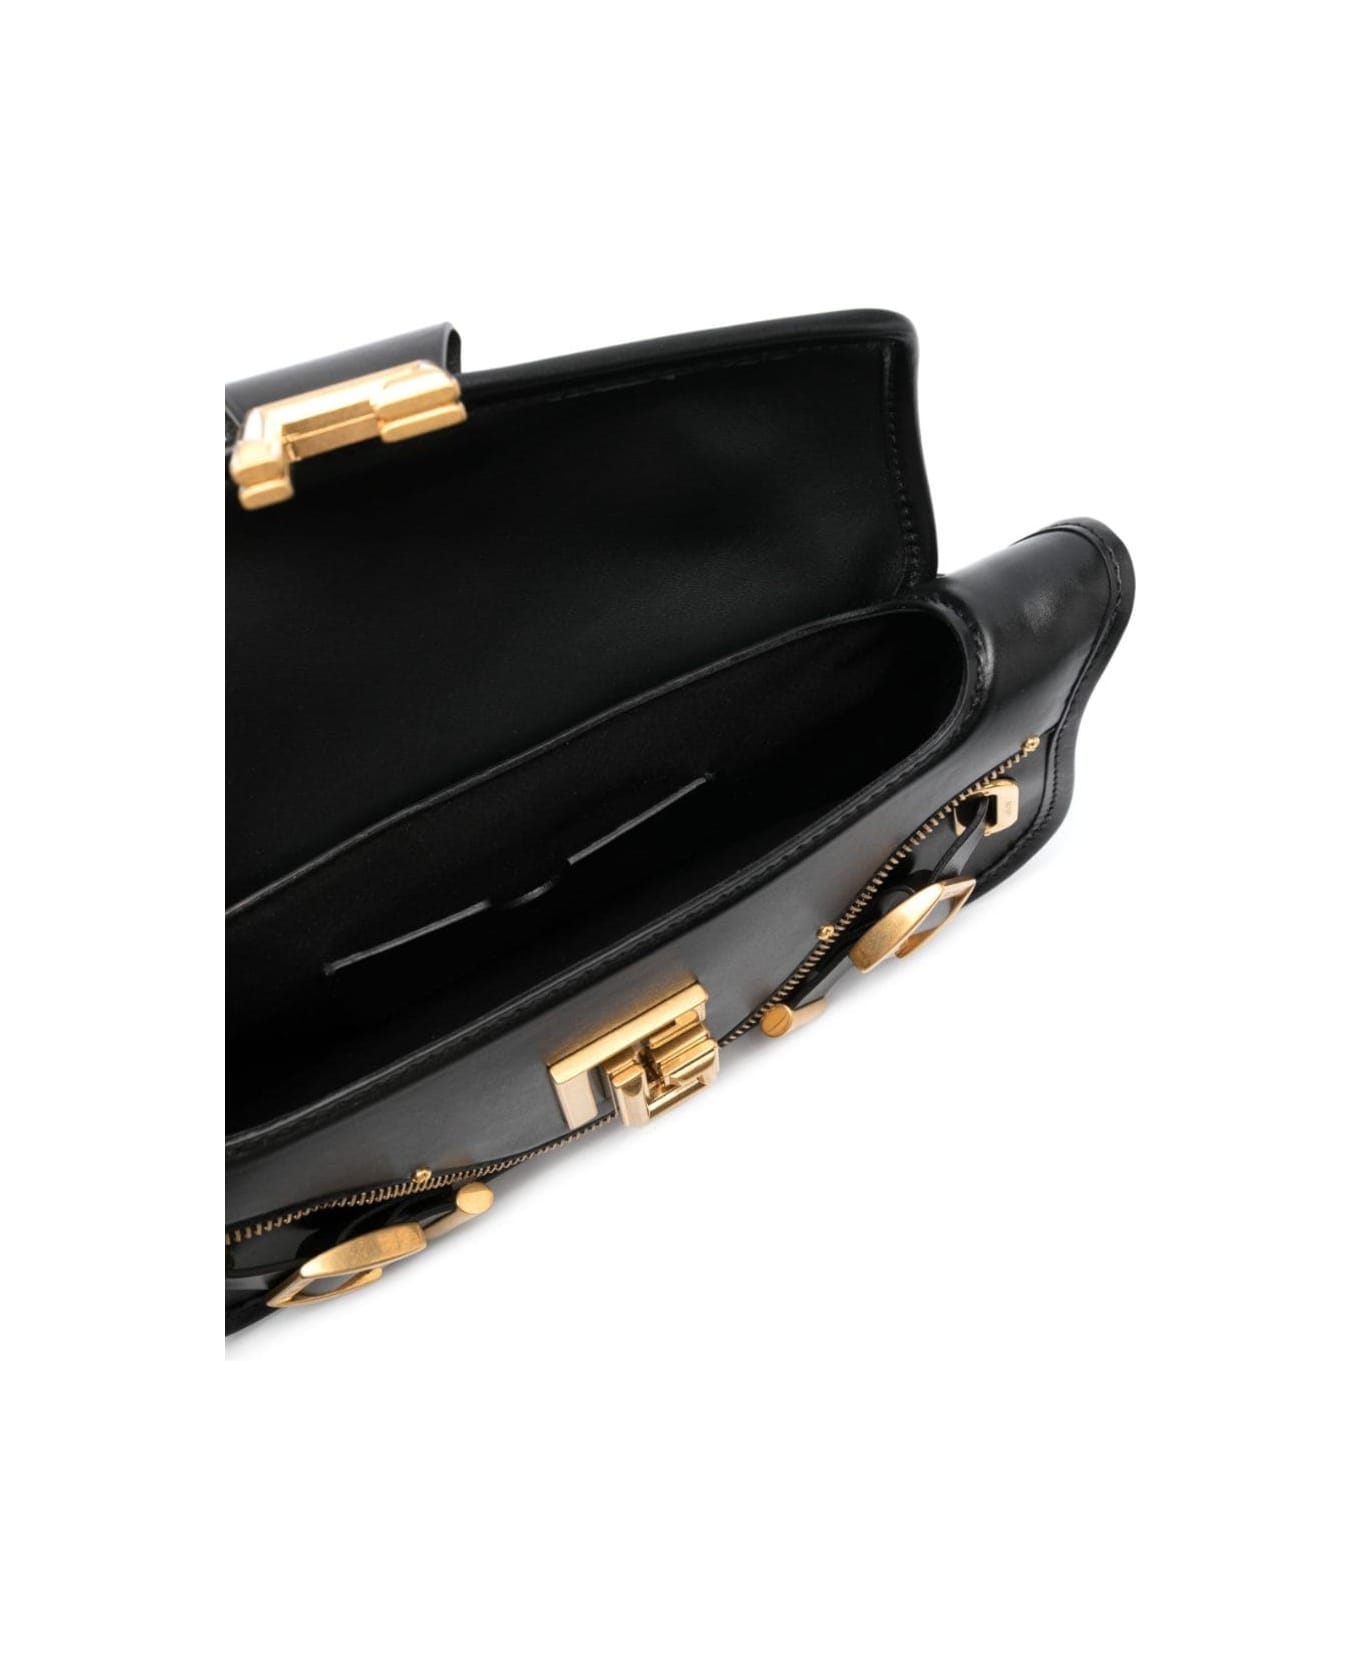 Balmain 'blaze' Black Clutch Bag With Pb Logo And Buckles In Smooth Leather Woman - Black